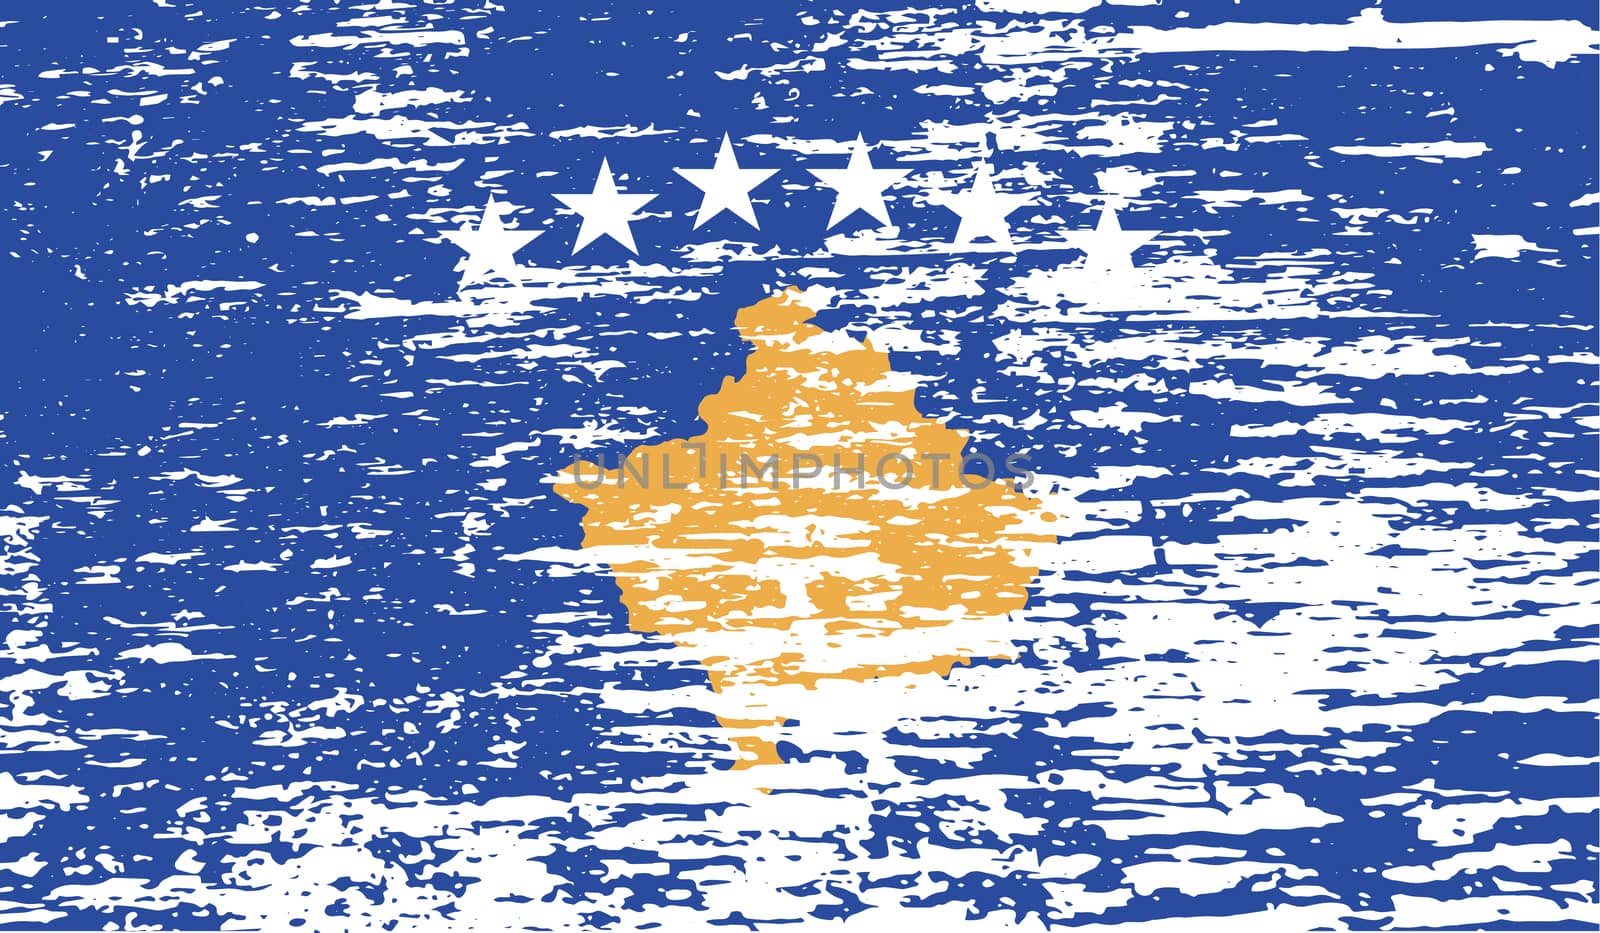 Flag of Kosovo with old texture.  illustration